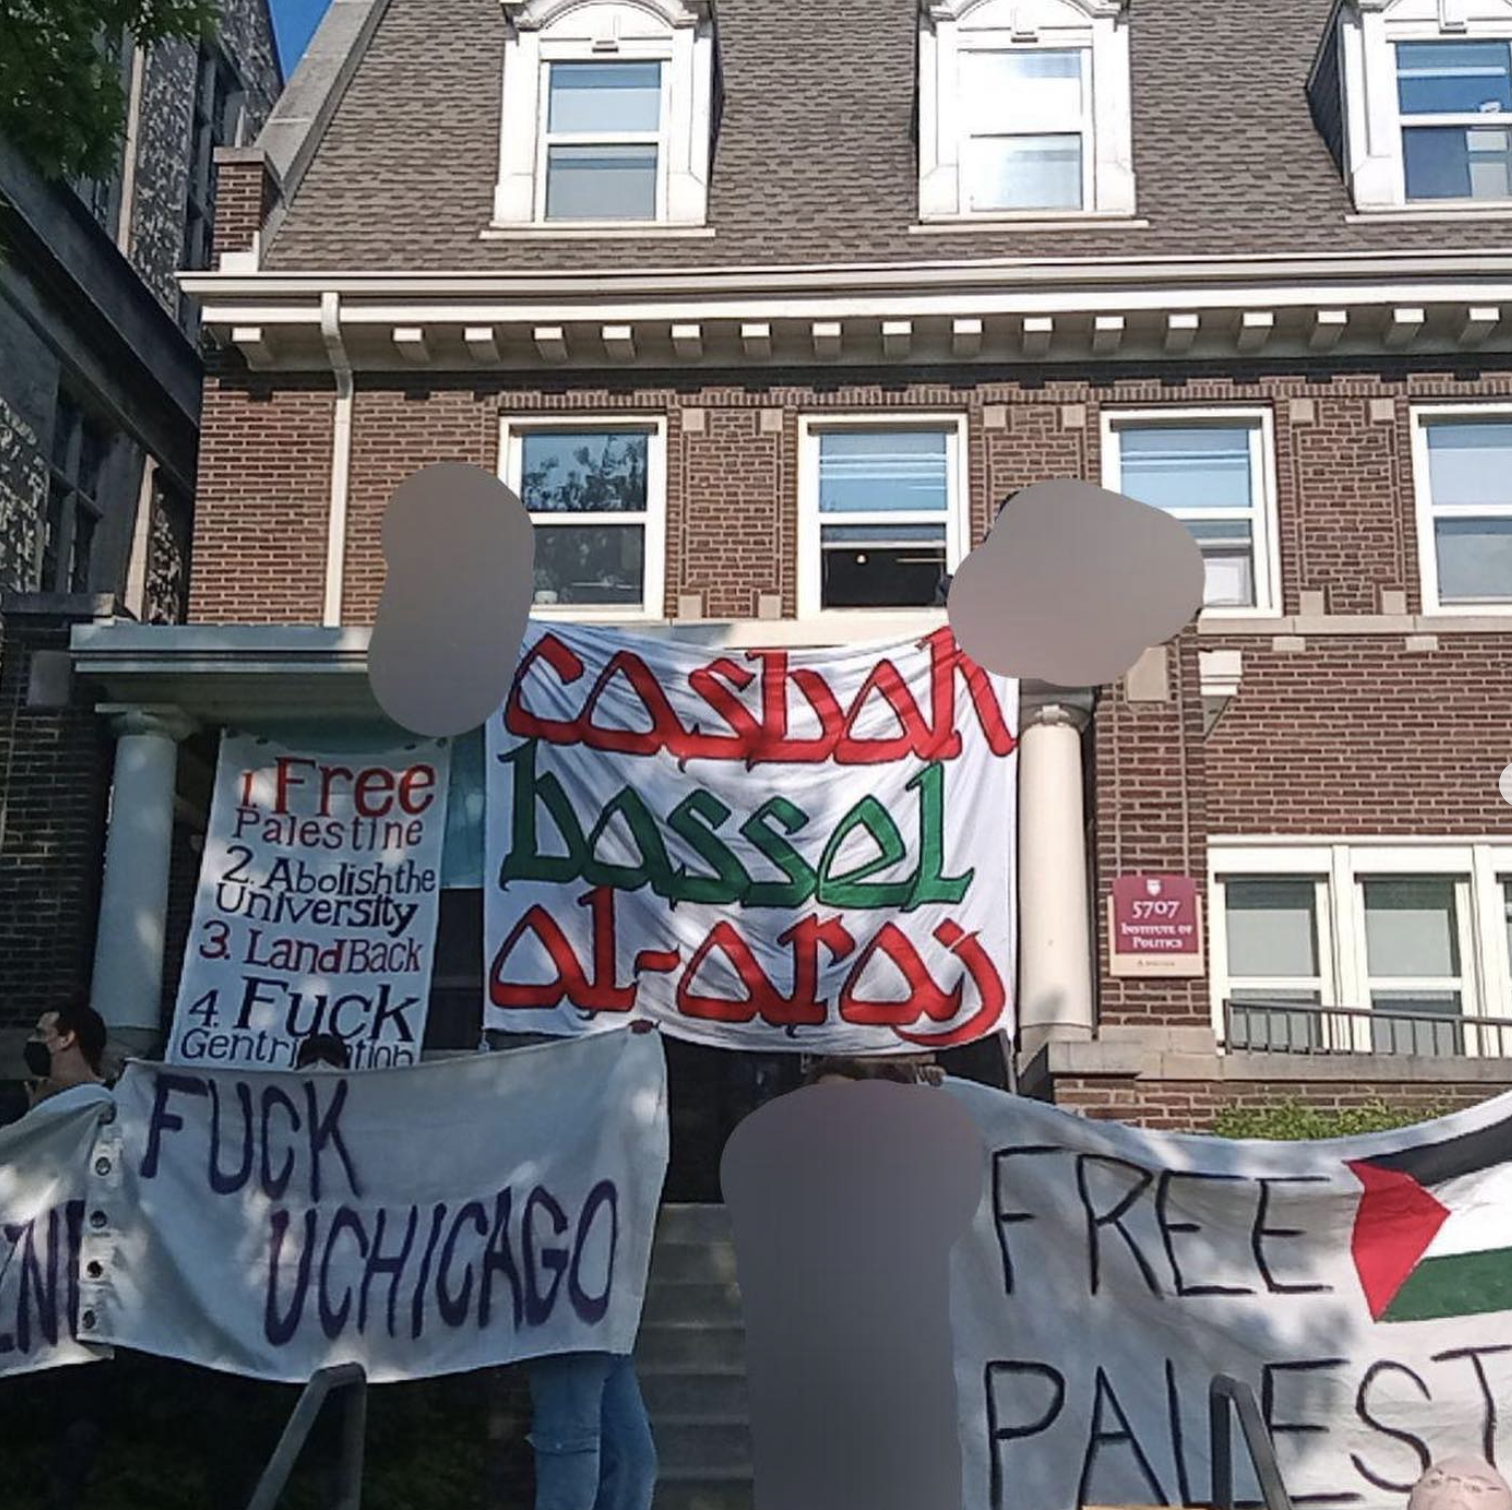 The occupied Institute of Politics building at University of Chicago, temporarily the Casbah Basel al-Araj, with various banners. They read "casbah bassel al-araj", "Fuck UChicago", "Free Palestine", and the demans "1. Free Palestine 2. Abolish the University 3. Land Back 4. Fuck Gentrification 5. Fuck 12"